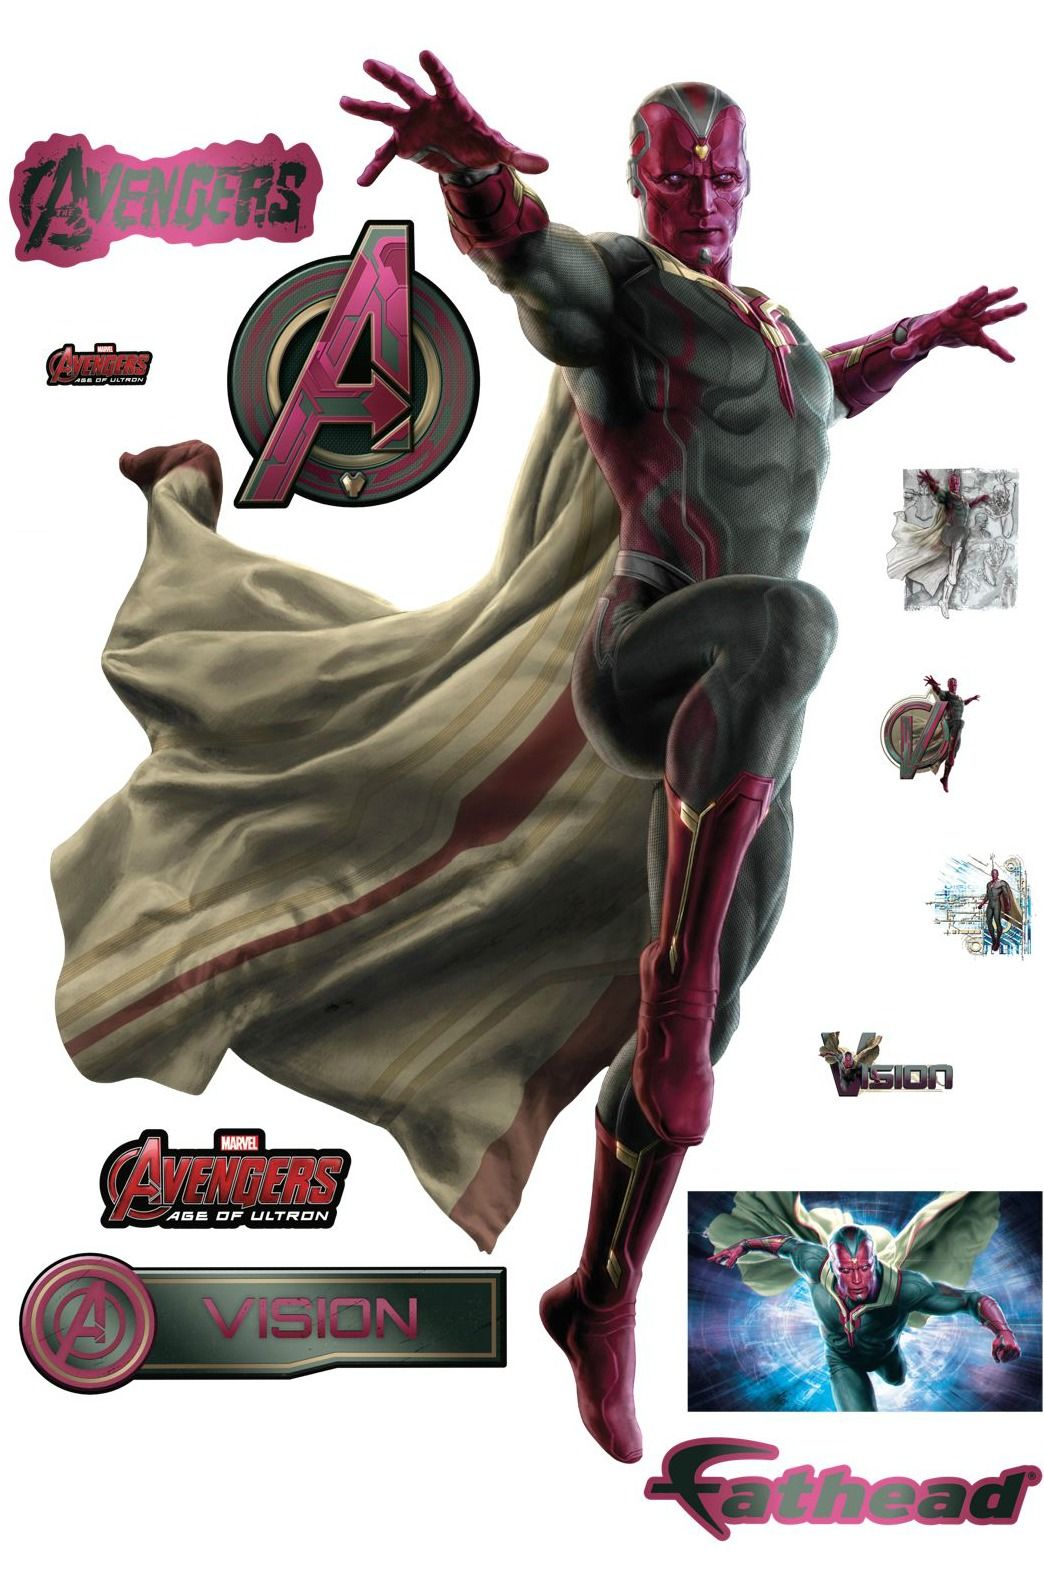 Avengers 2 Fathead Decals 14